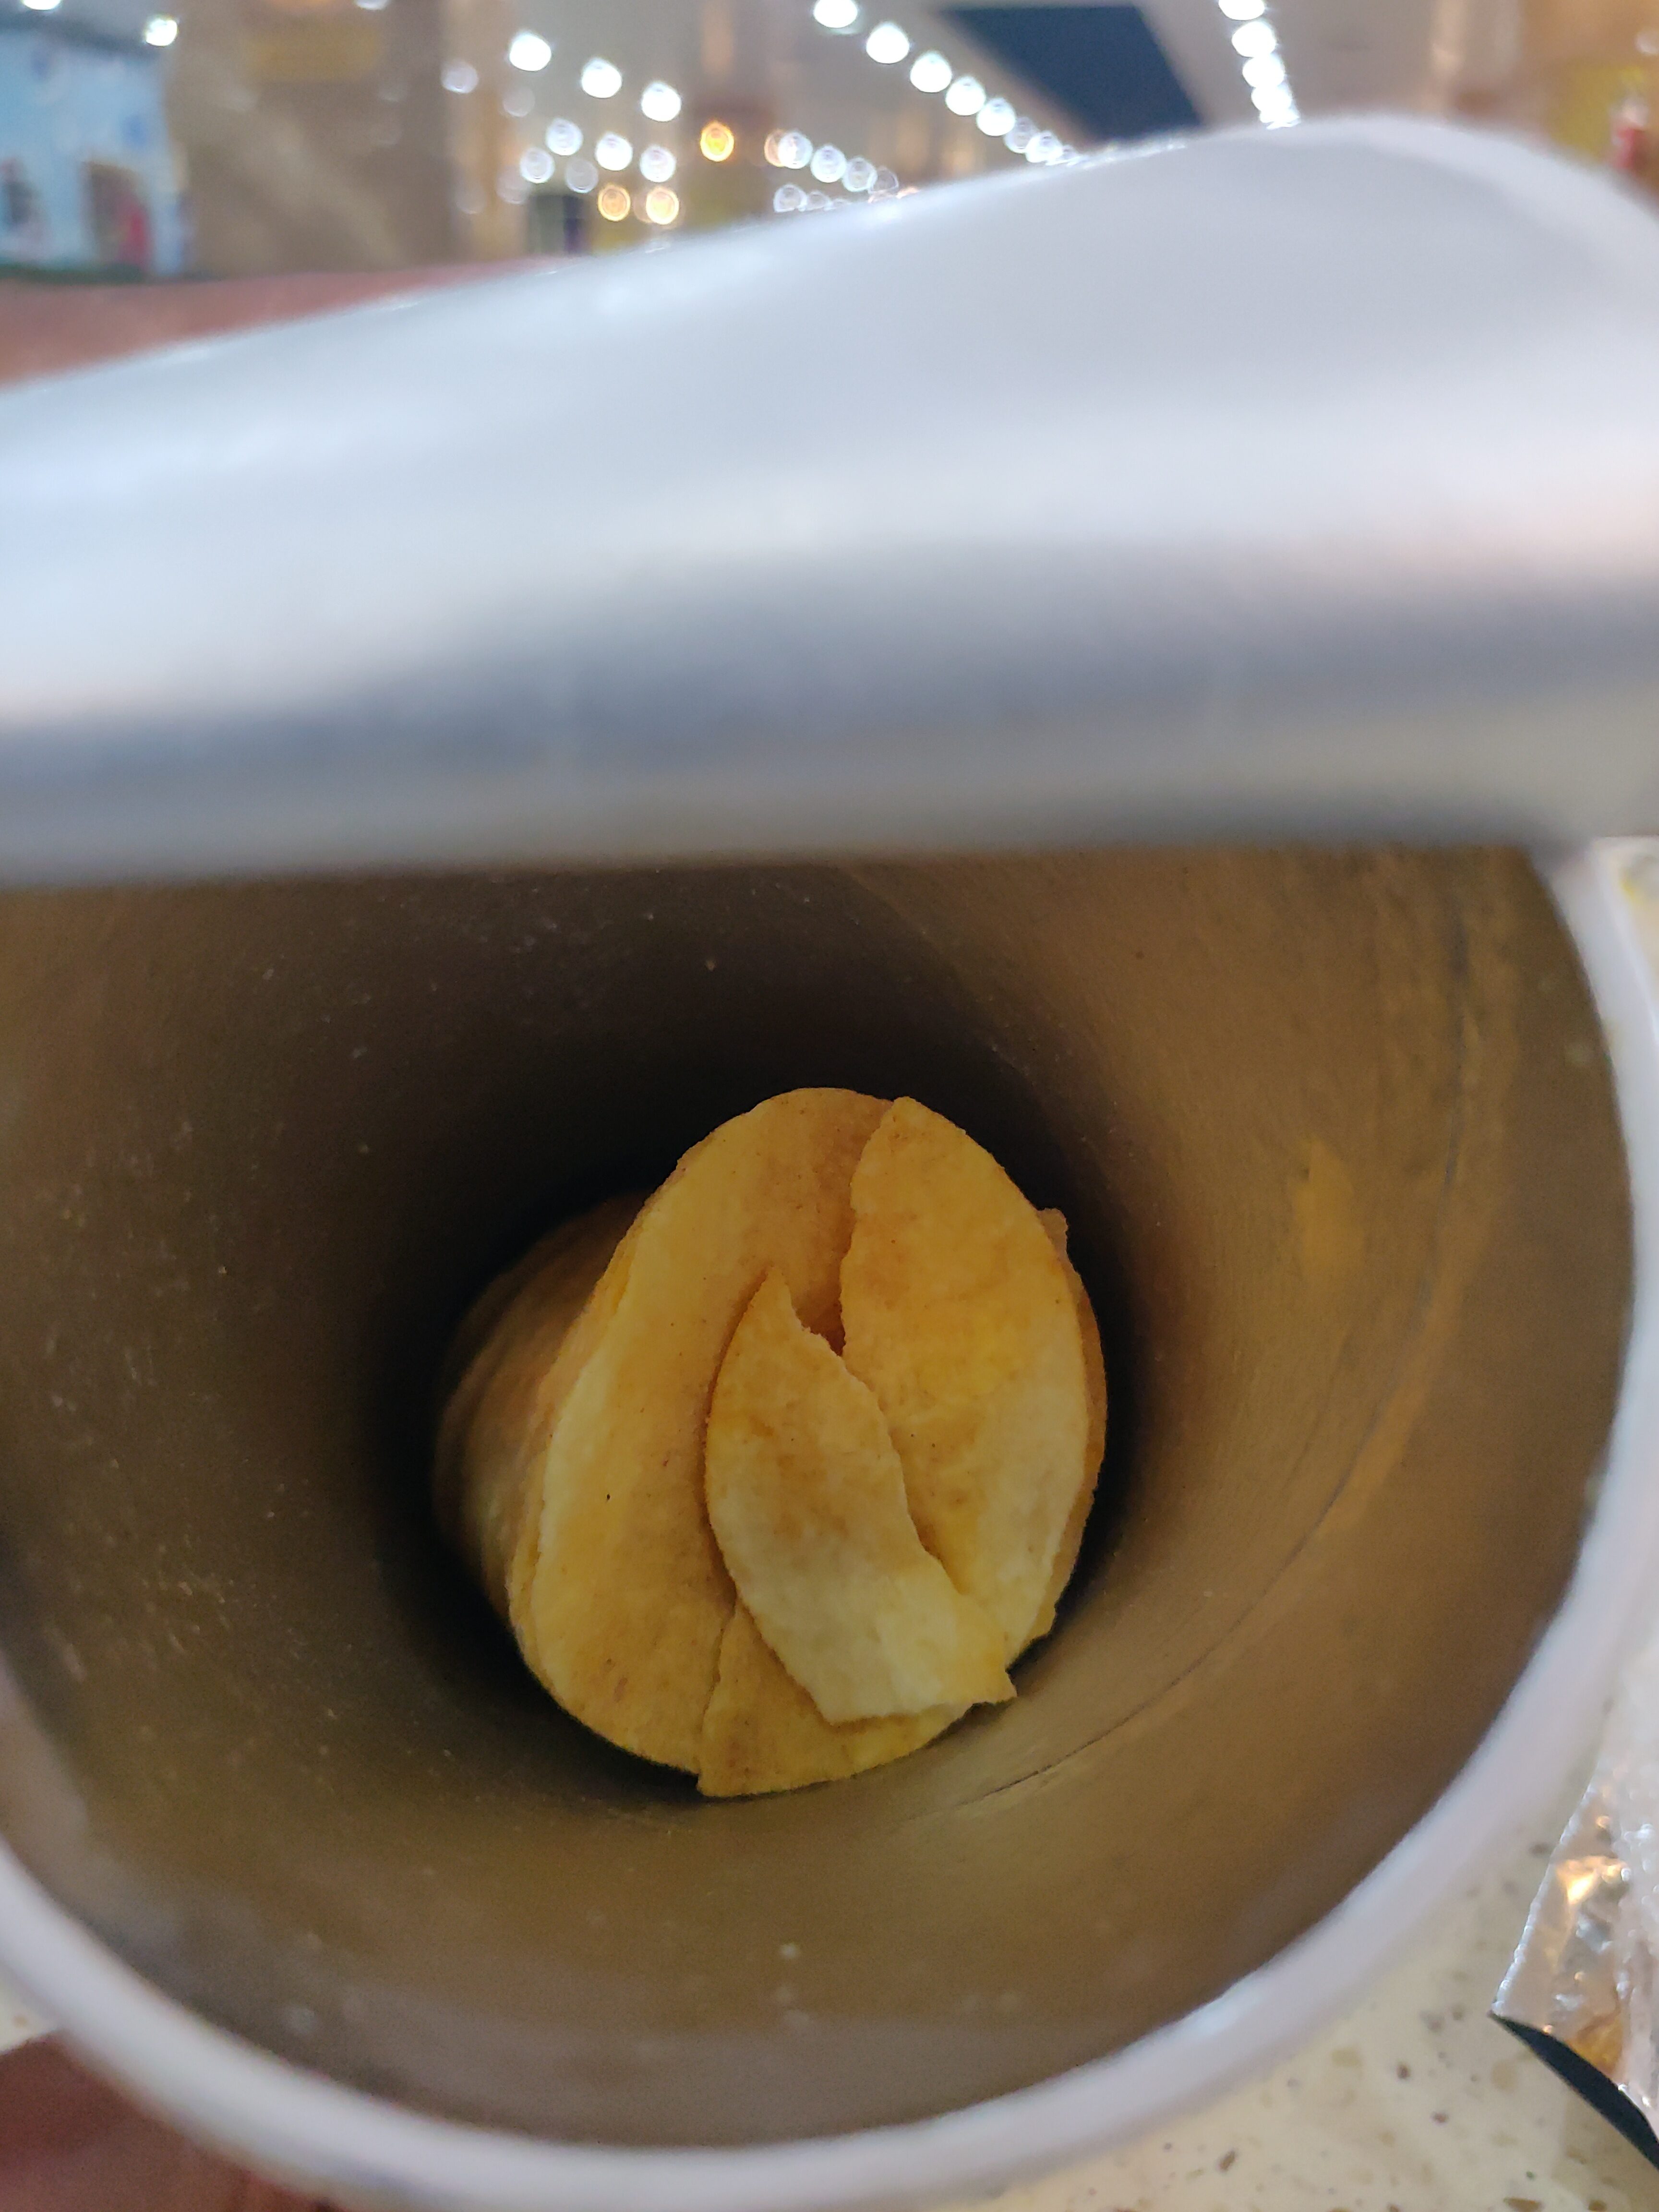 Pringles - Recycling instructions and/or packaging information